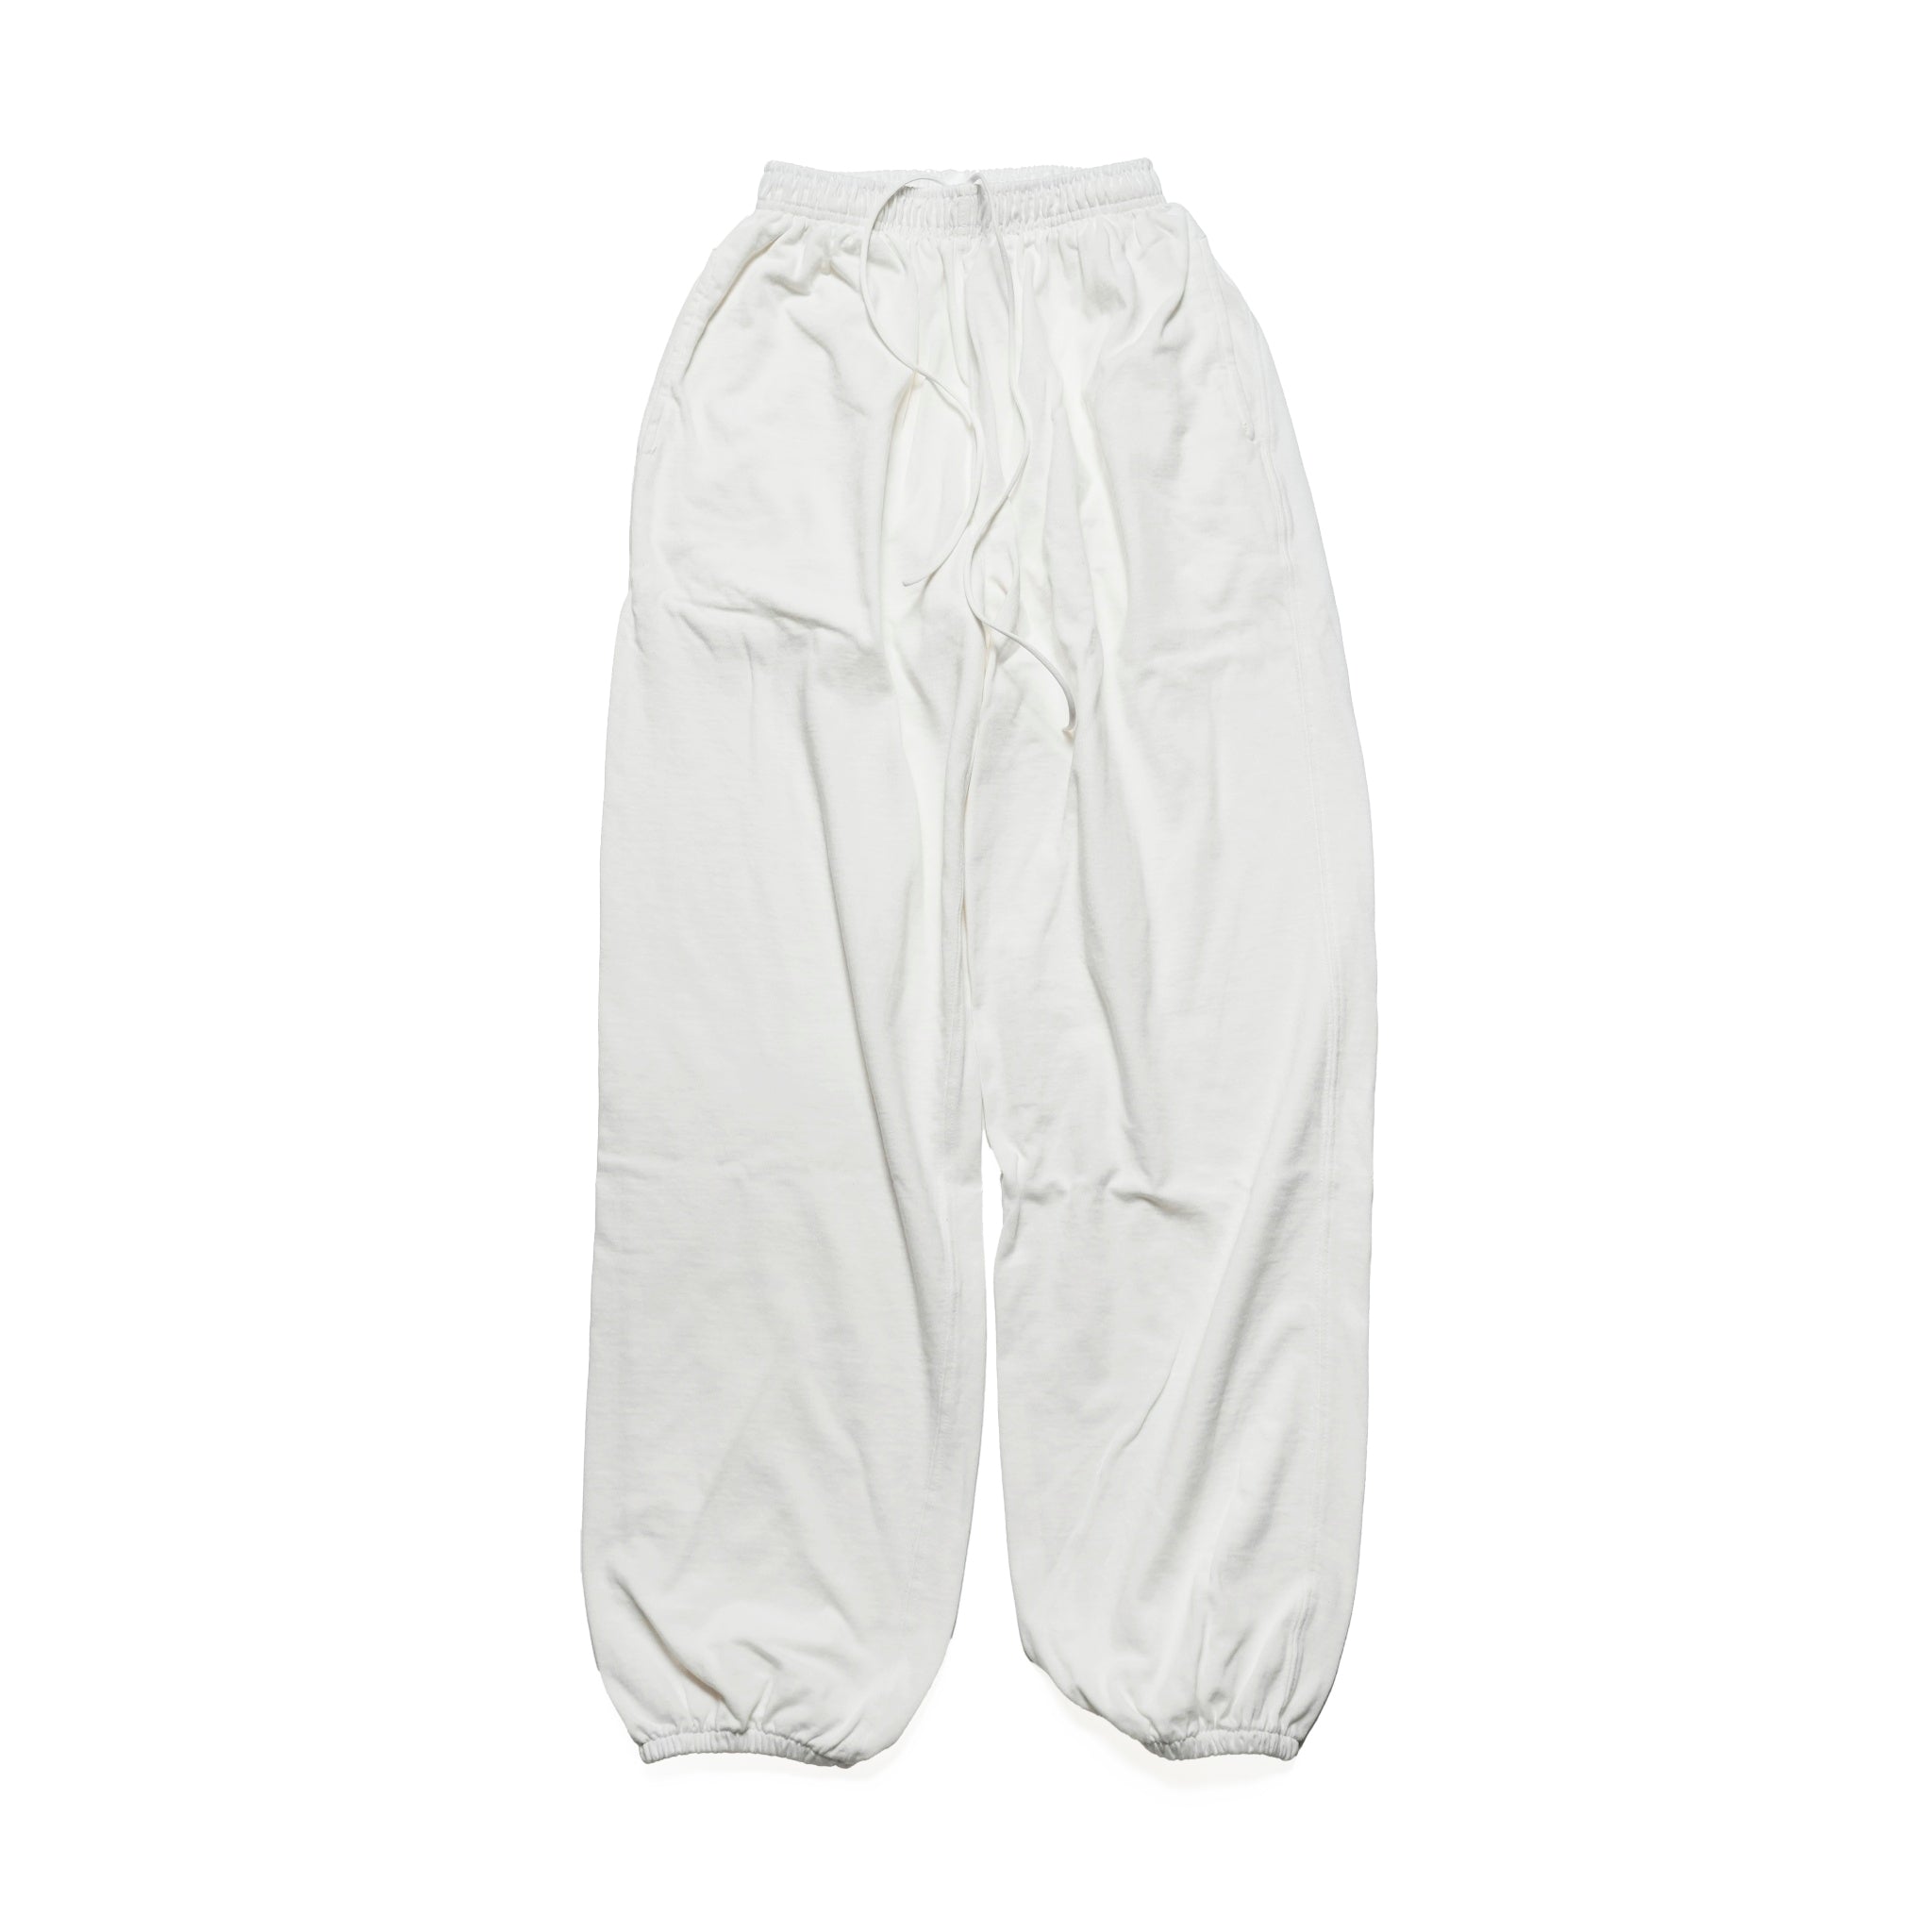 No:cstm03 | Name:Heavy Coton Sweat Pants | Color:#White,#Black,#Navy,#Charcoal | Size:M/L/XL | 【Smoke T One】【ONE CS FITS ALL】